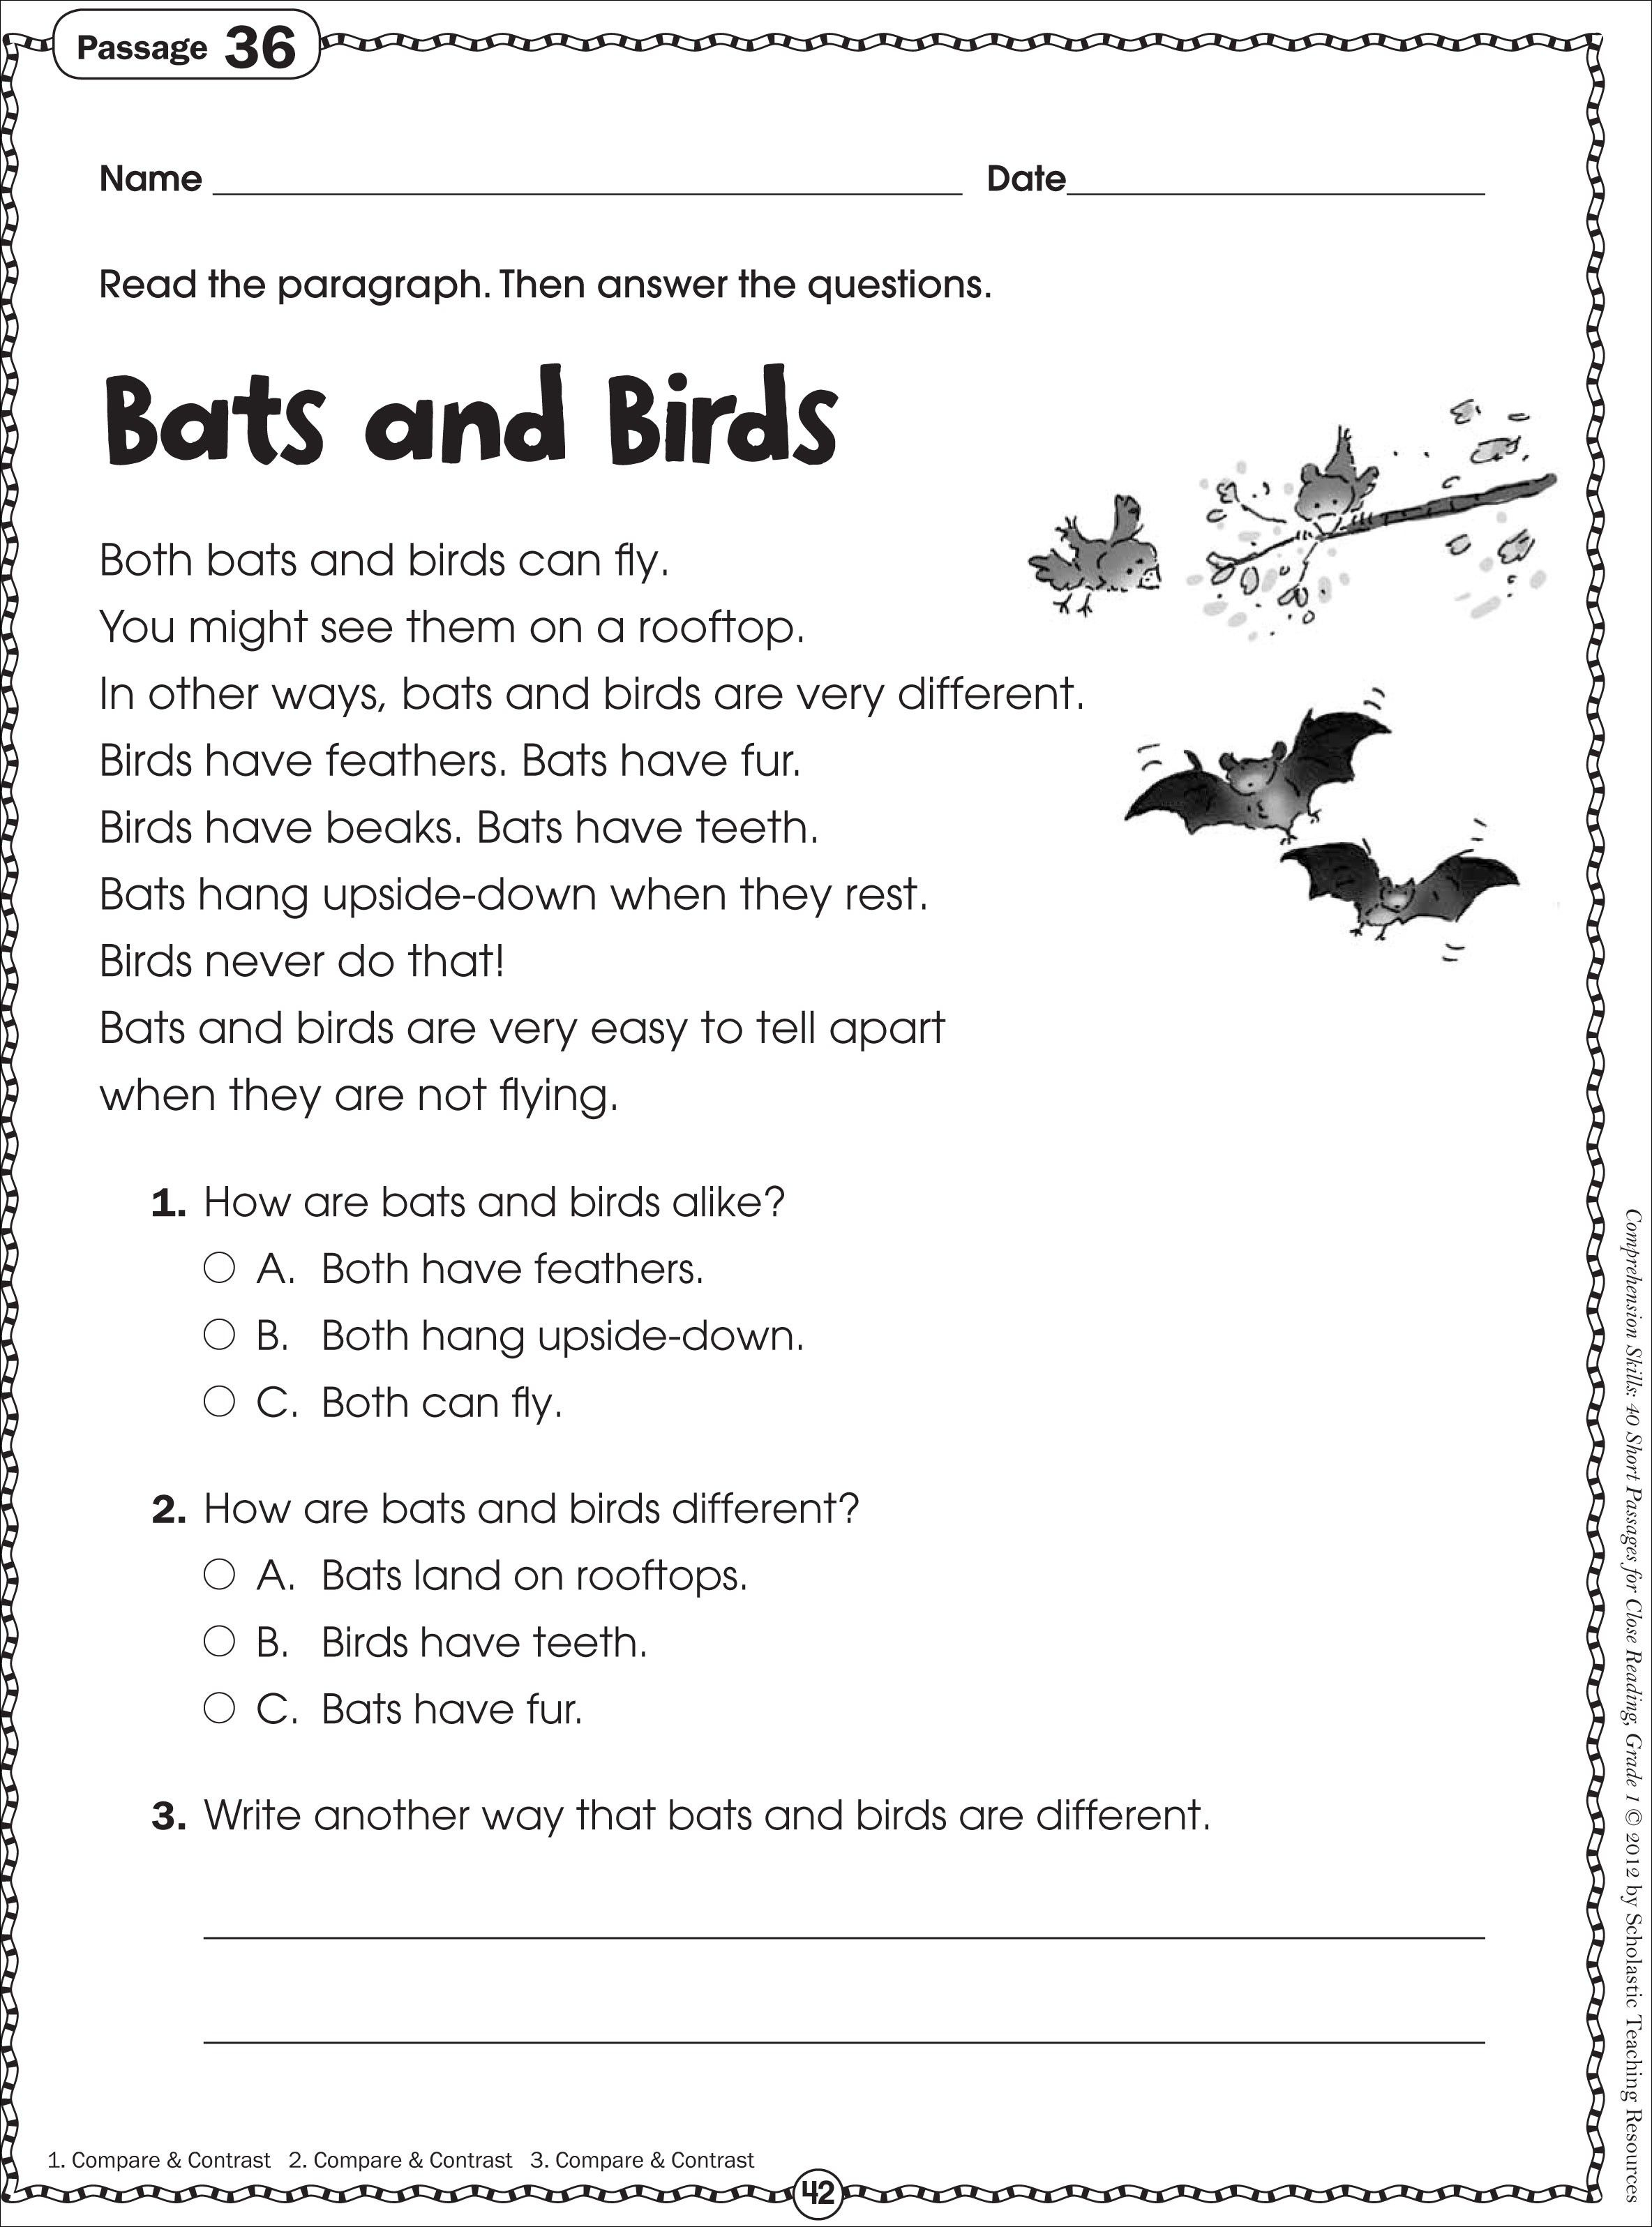 Free Printable Reading Comprehension Worksheets For Kindergarten - Free Printable Reading Passages With Questions